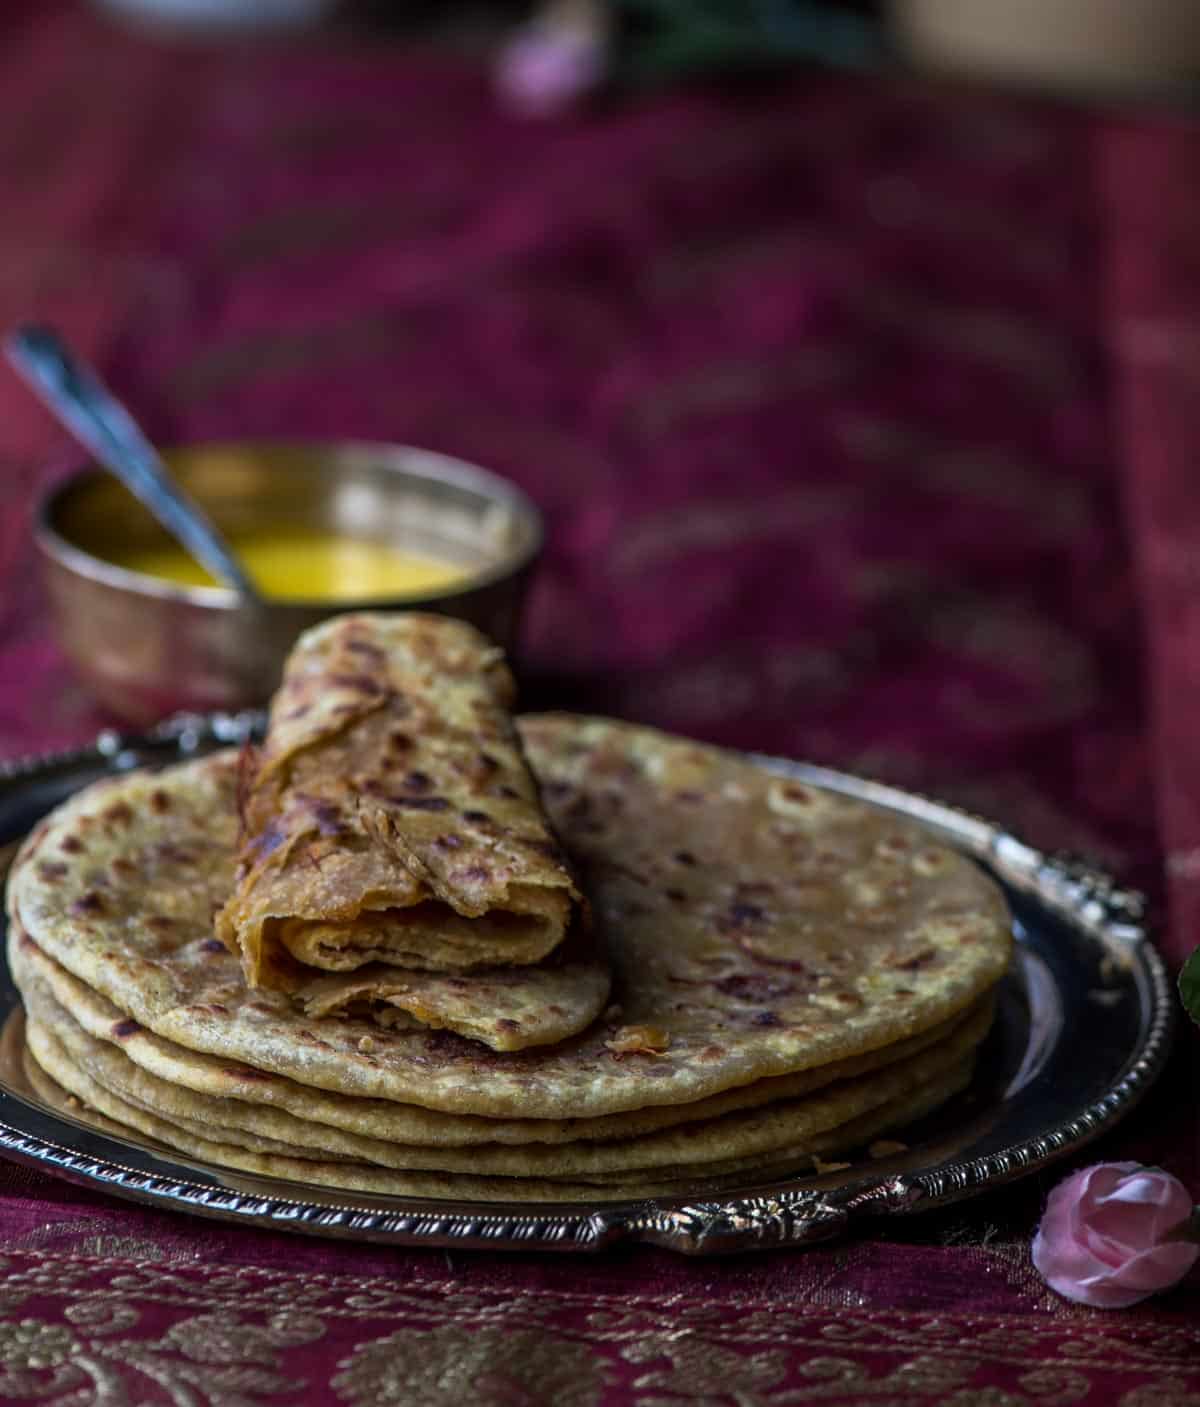 Eat Whole wheat puran poli guilt free! Though not as flaky as the one made with maida (all purpose flour), it is still as delicious.